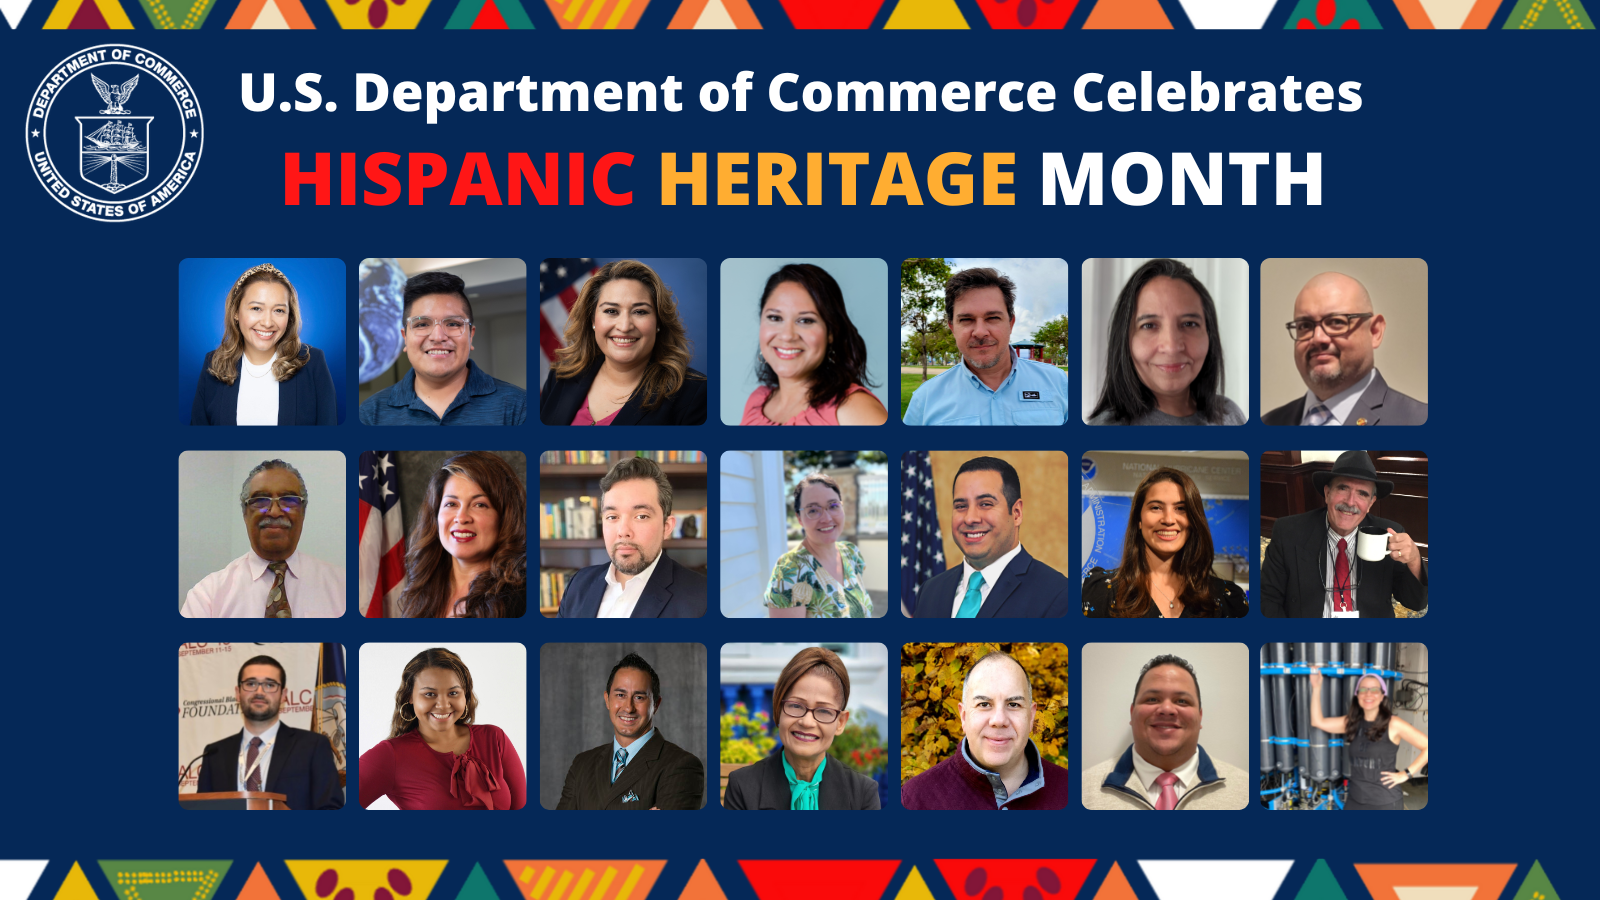 Equity, Diversity and School Climate / Hispanic Heritage Month